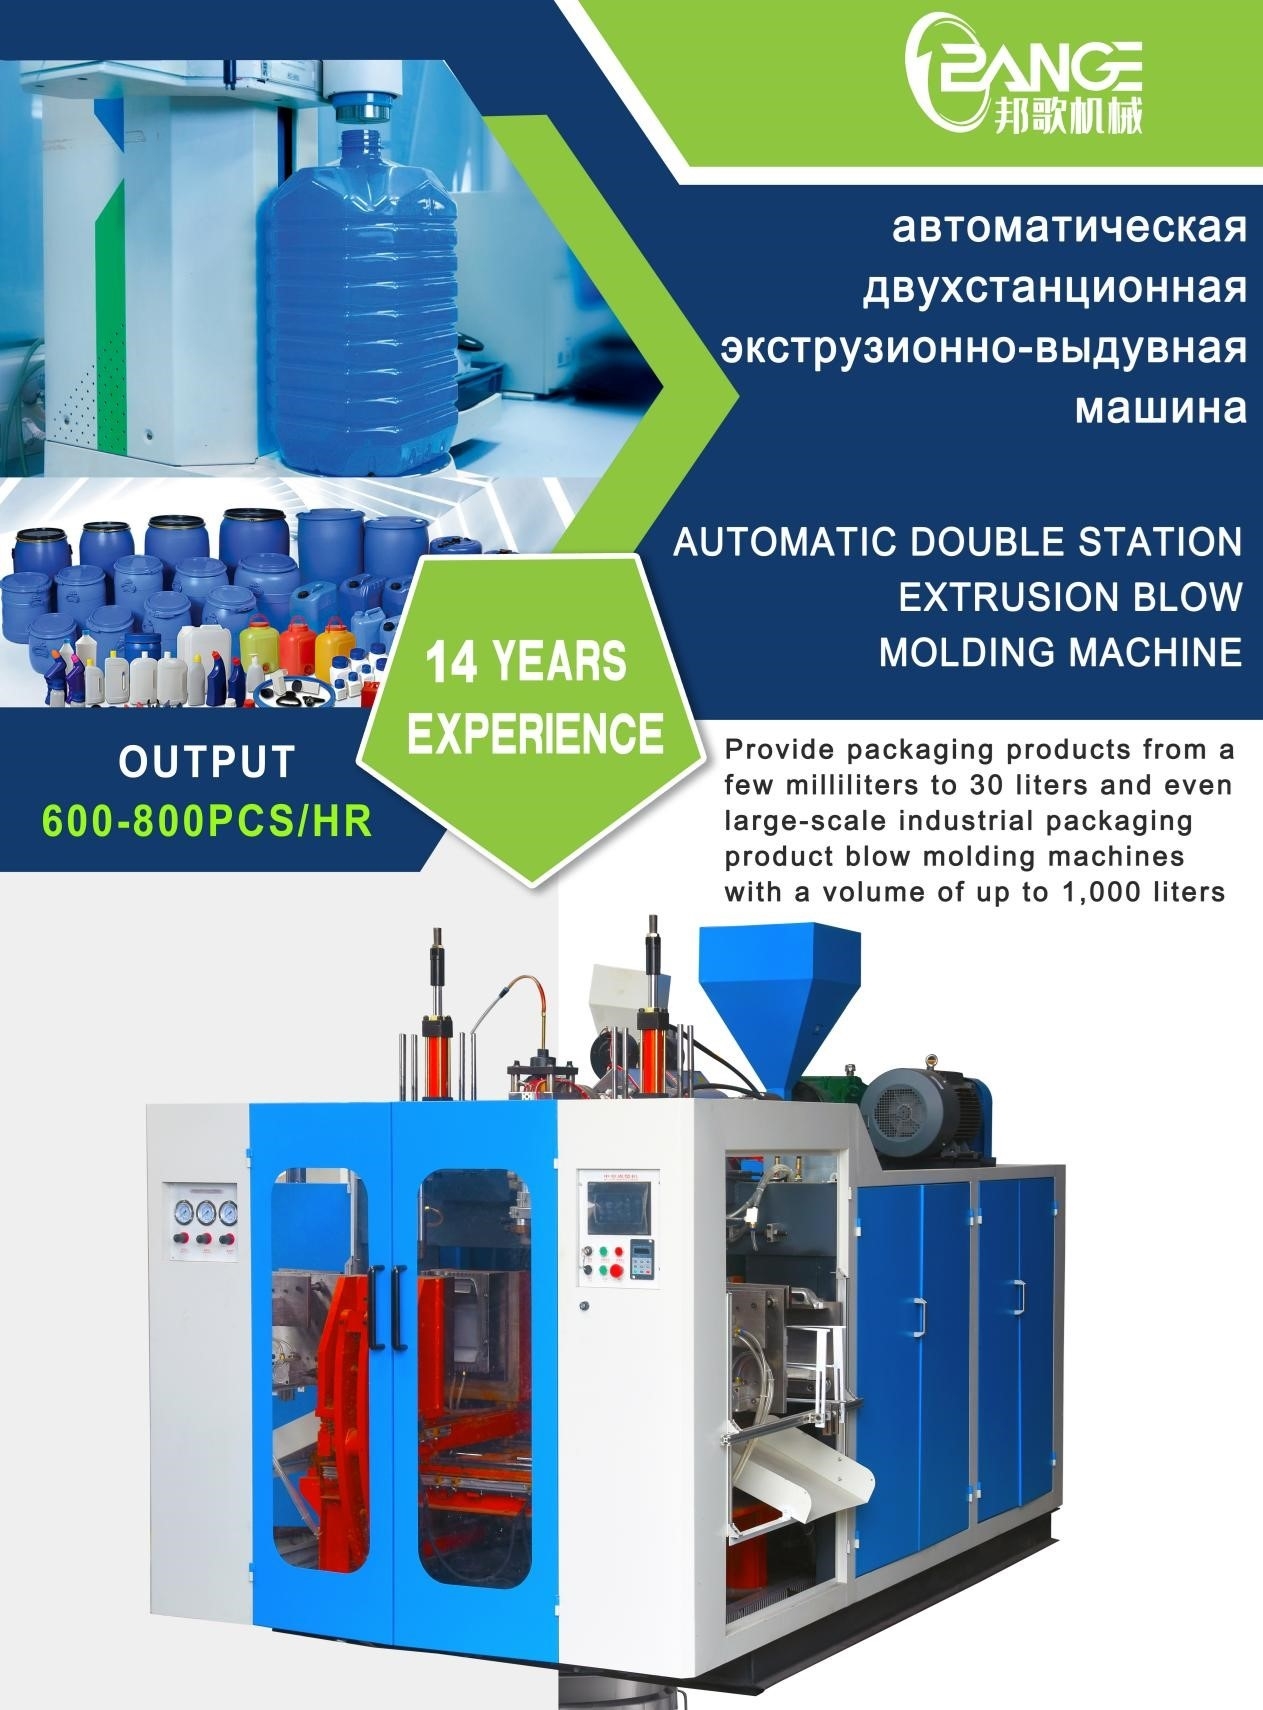 Bottle blowing machines are an essential piece of machinery for many manufacturing companies